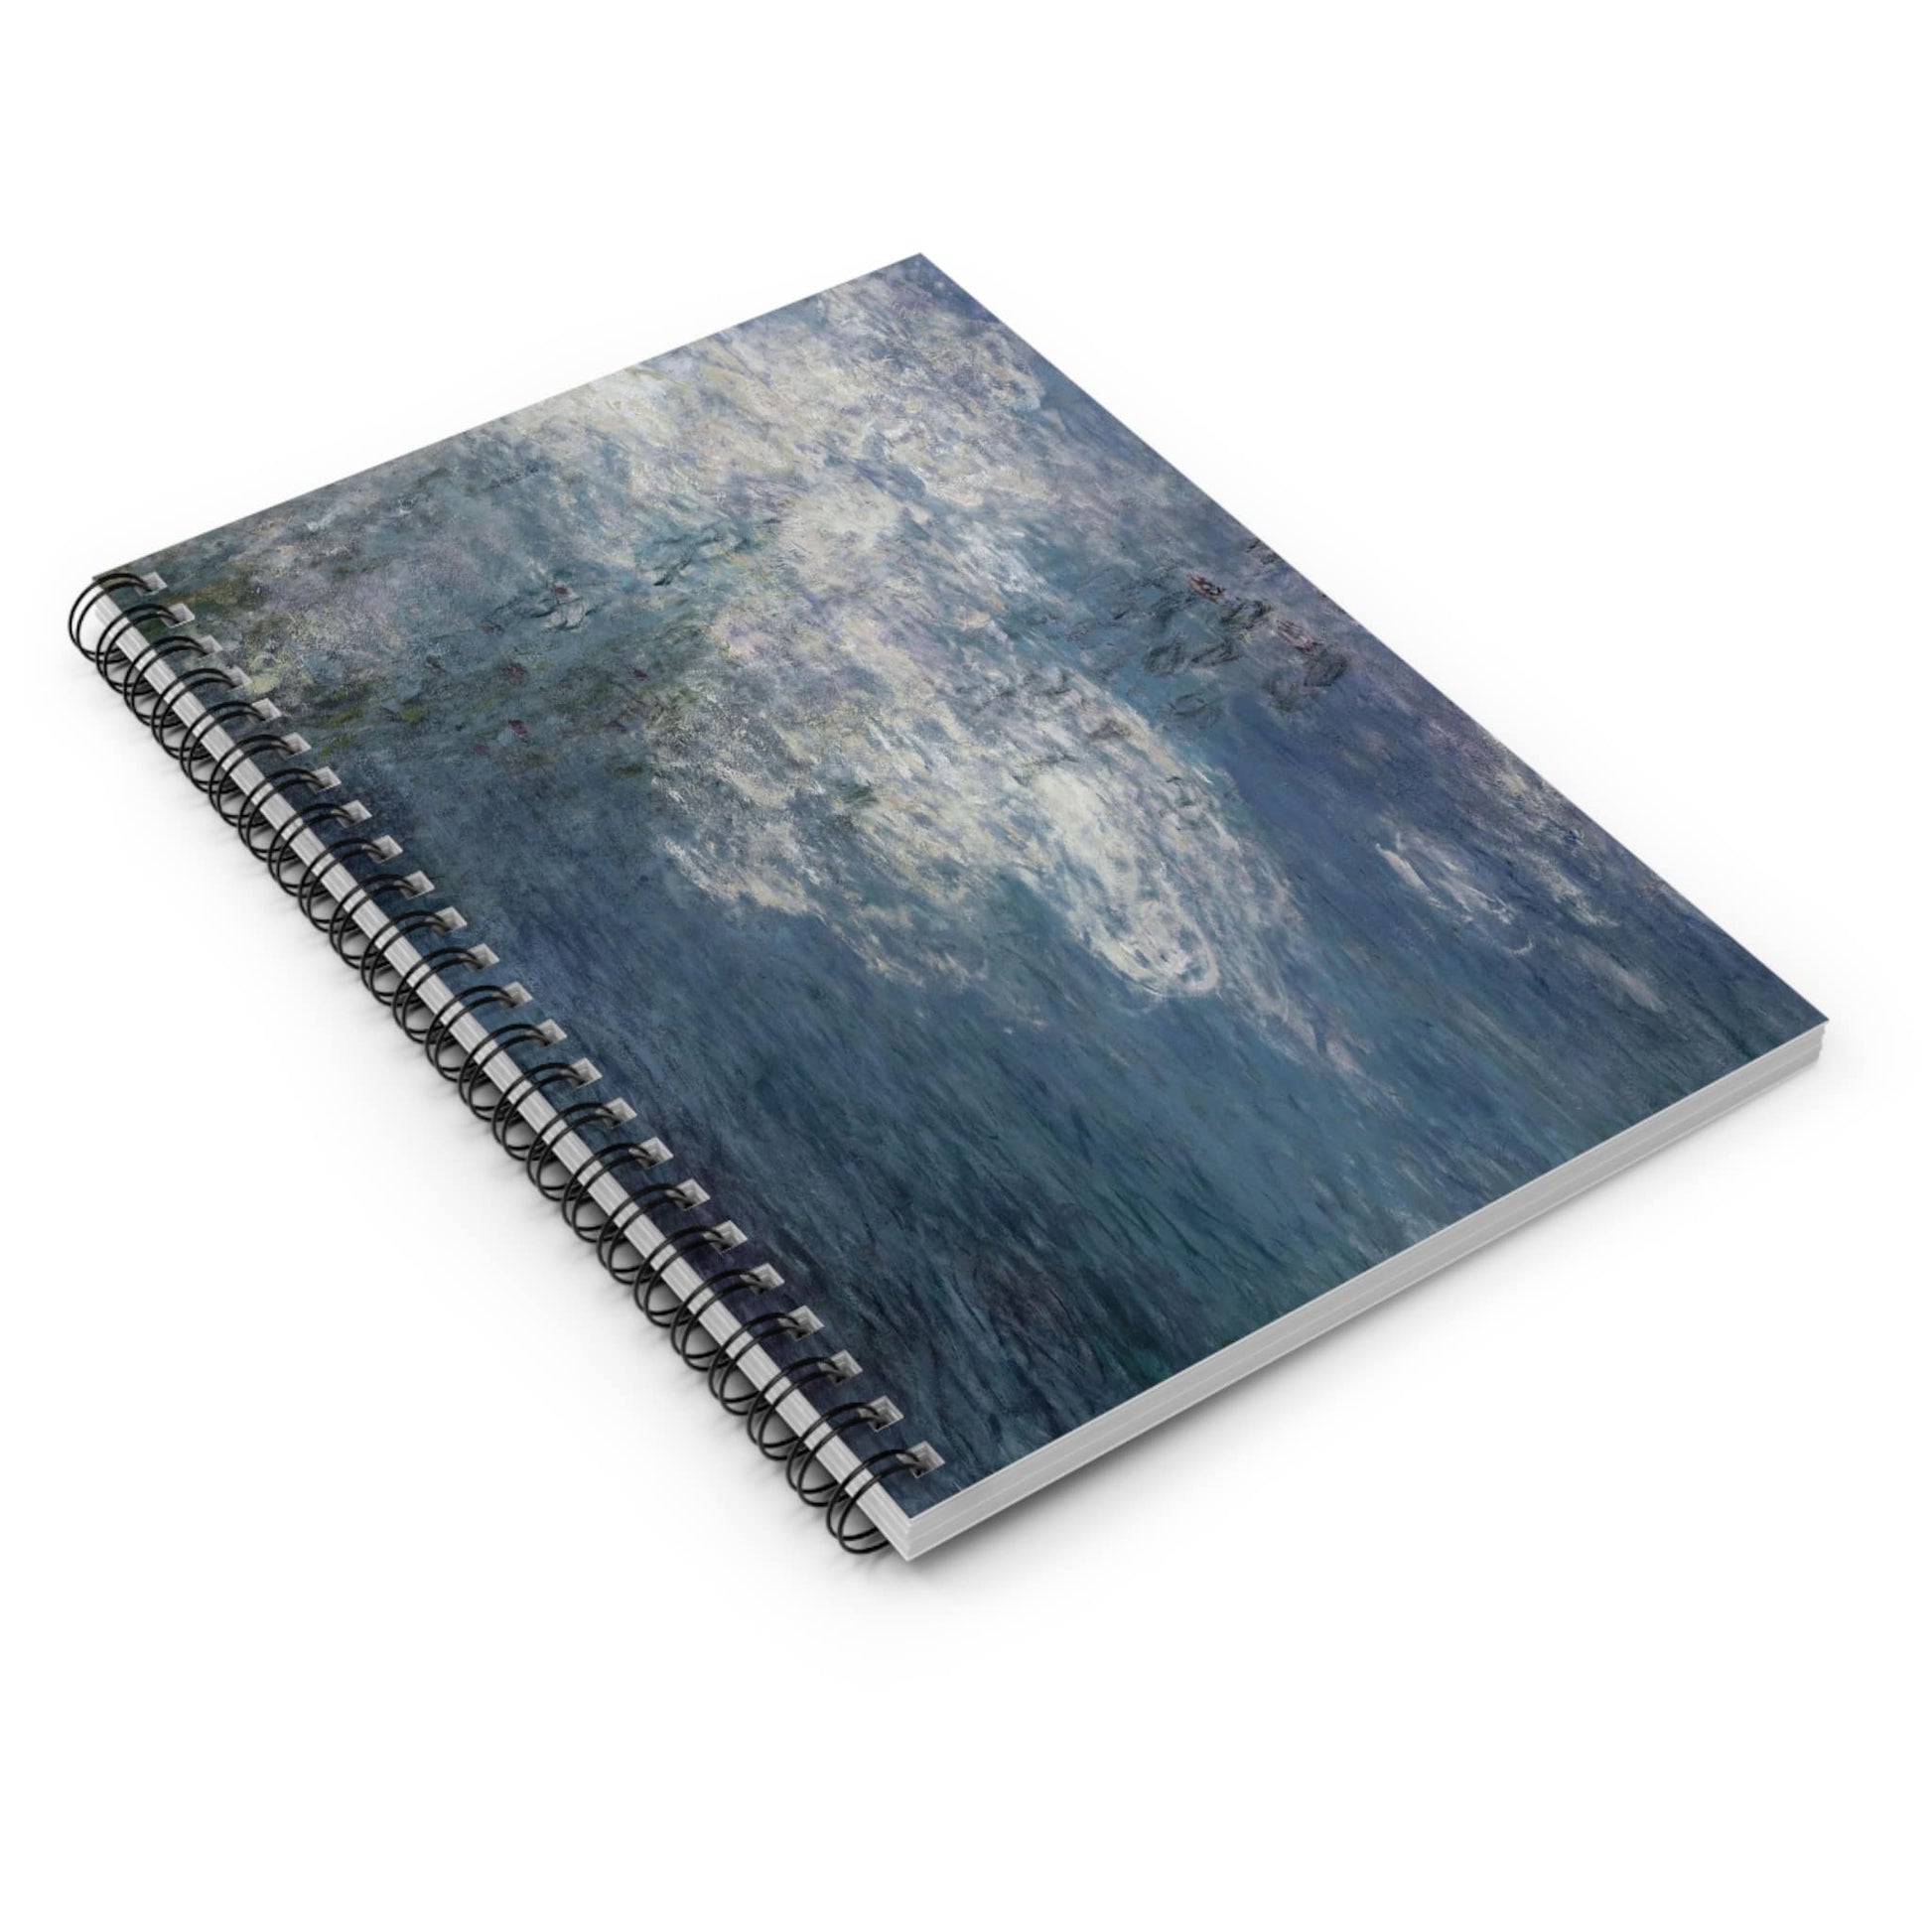 Serene Peaceful Spiral Notebook Laying Flat on White Surface